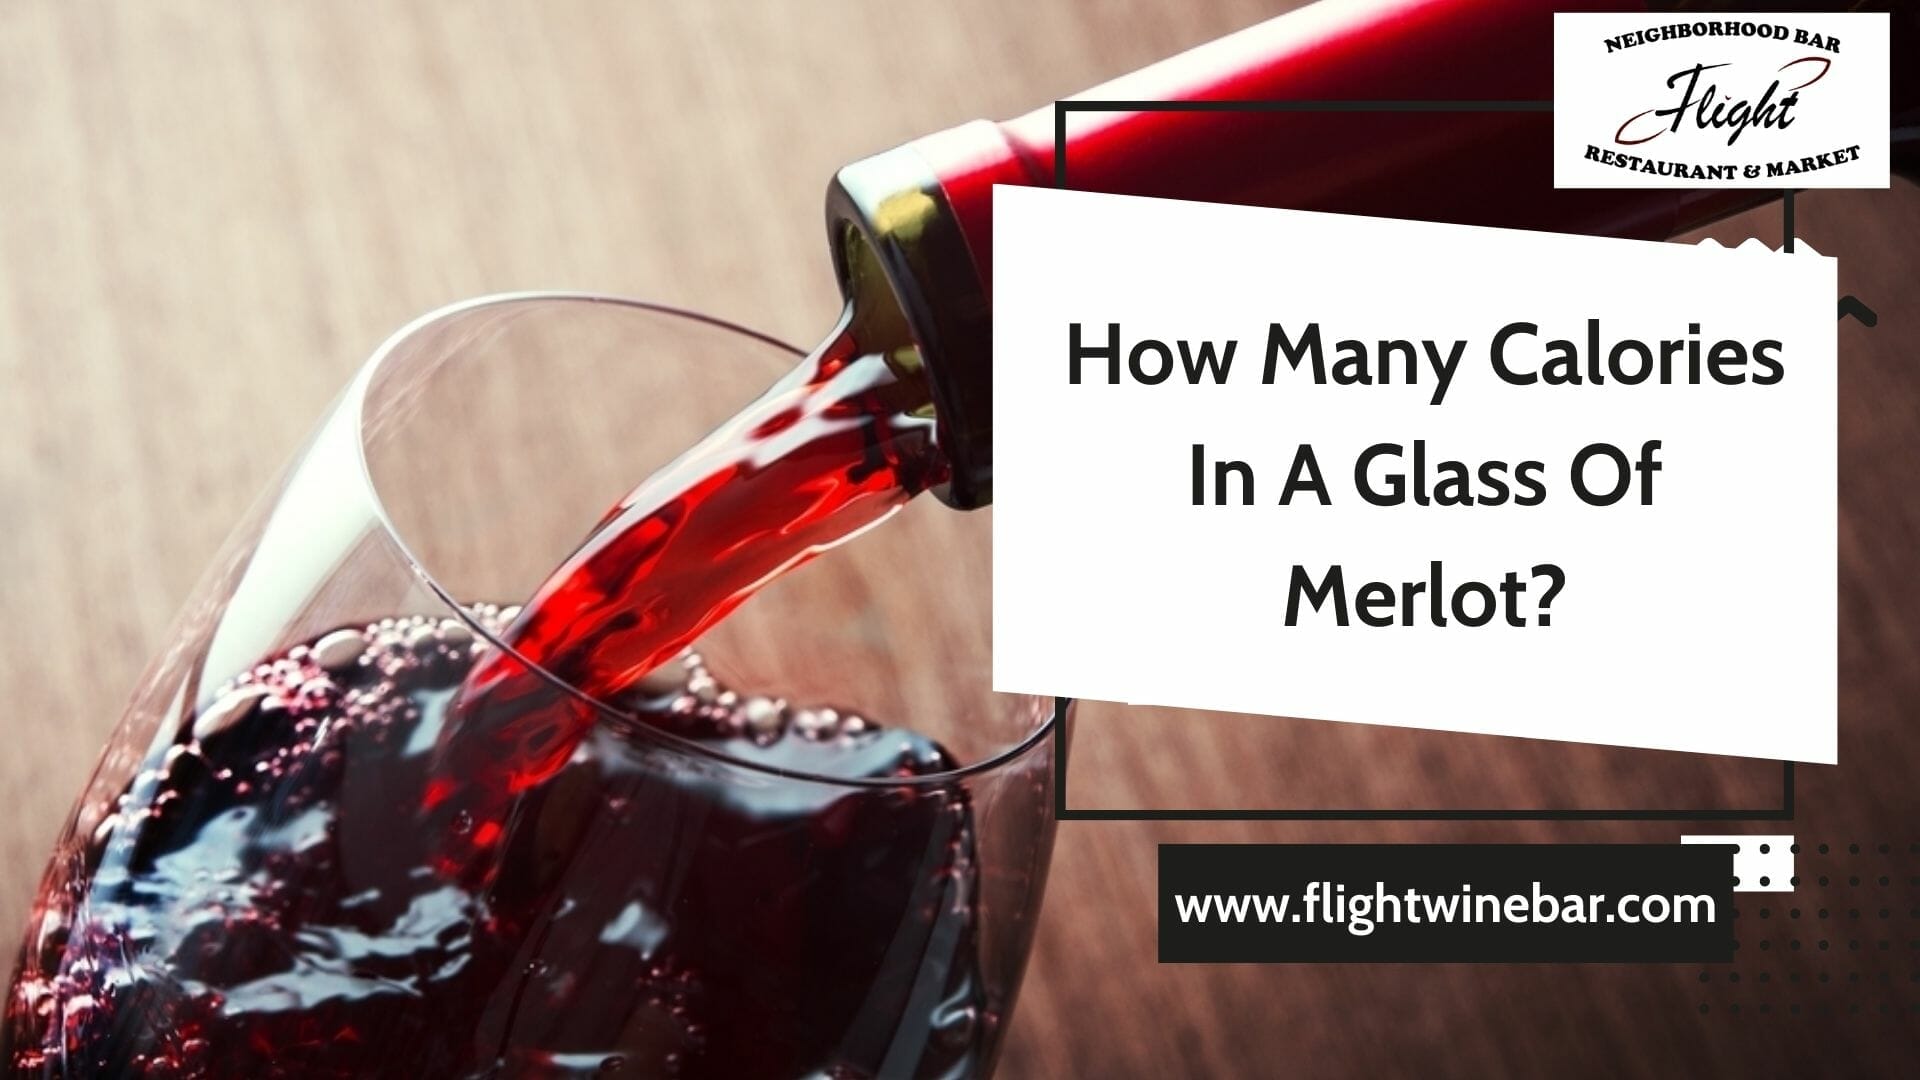 ﻿How Many Calories In A Glass Of Merlot